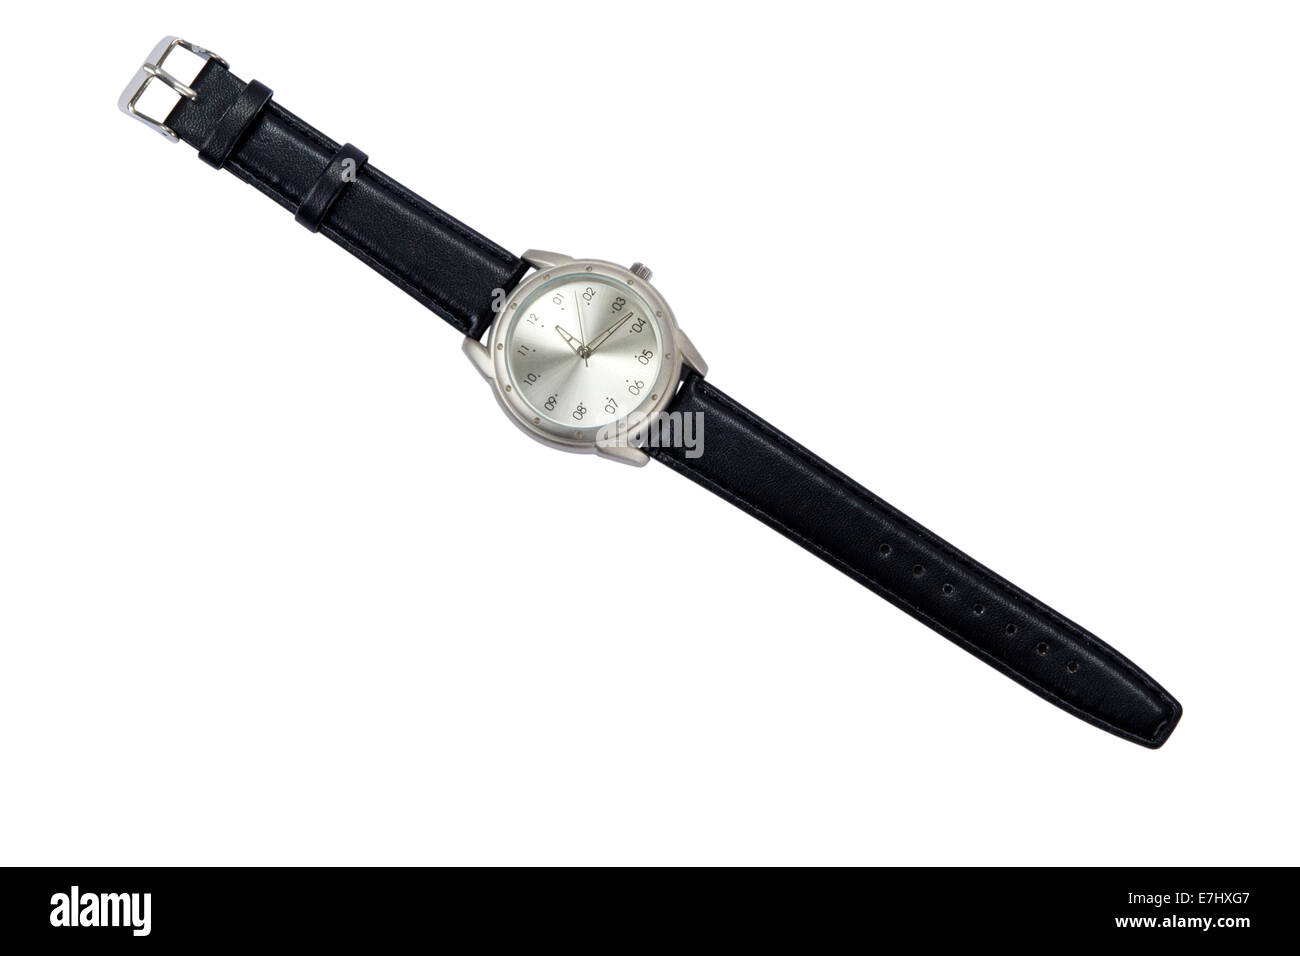 Classic Analog Men's Wrist Watch isolated over white background with clipping path Stock Photo